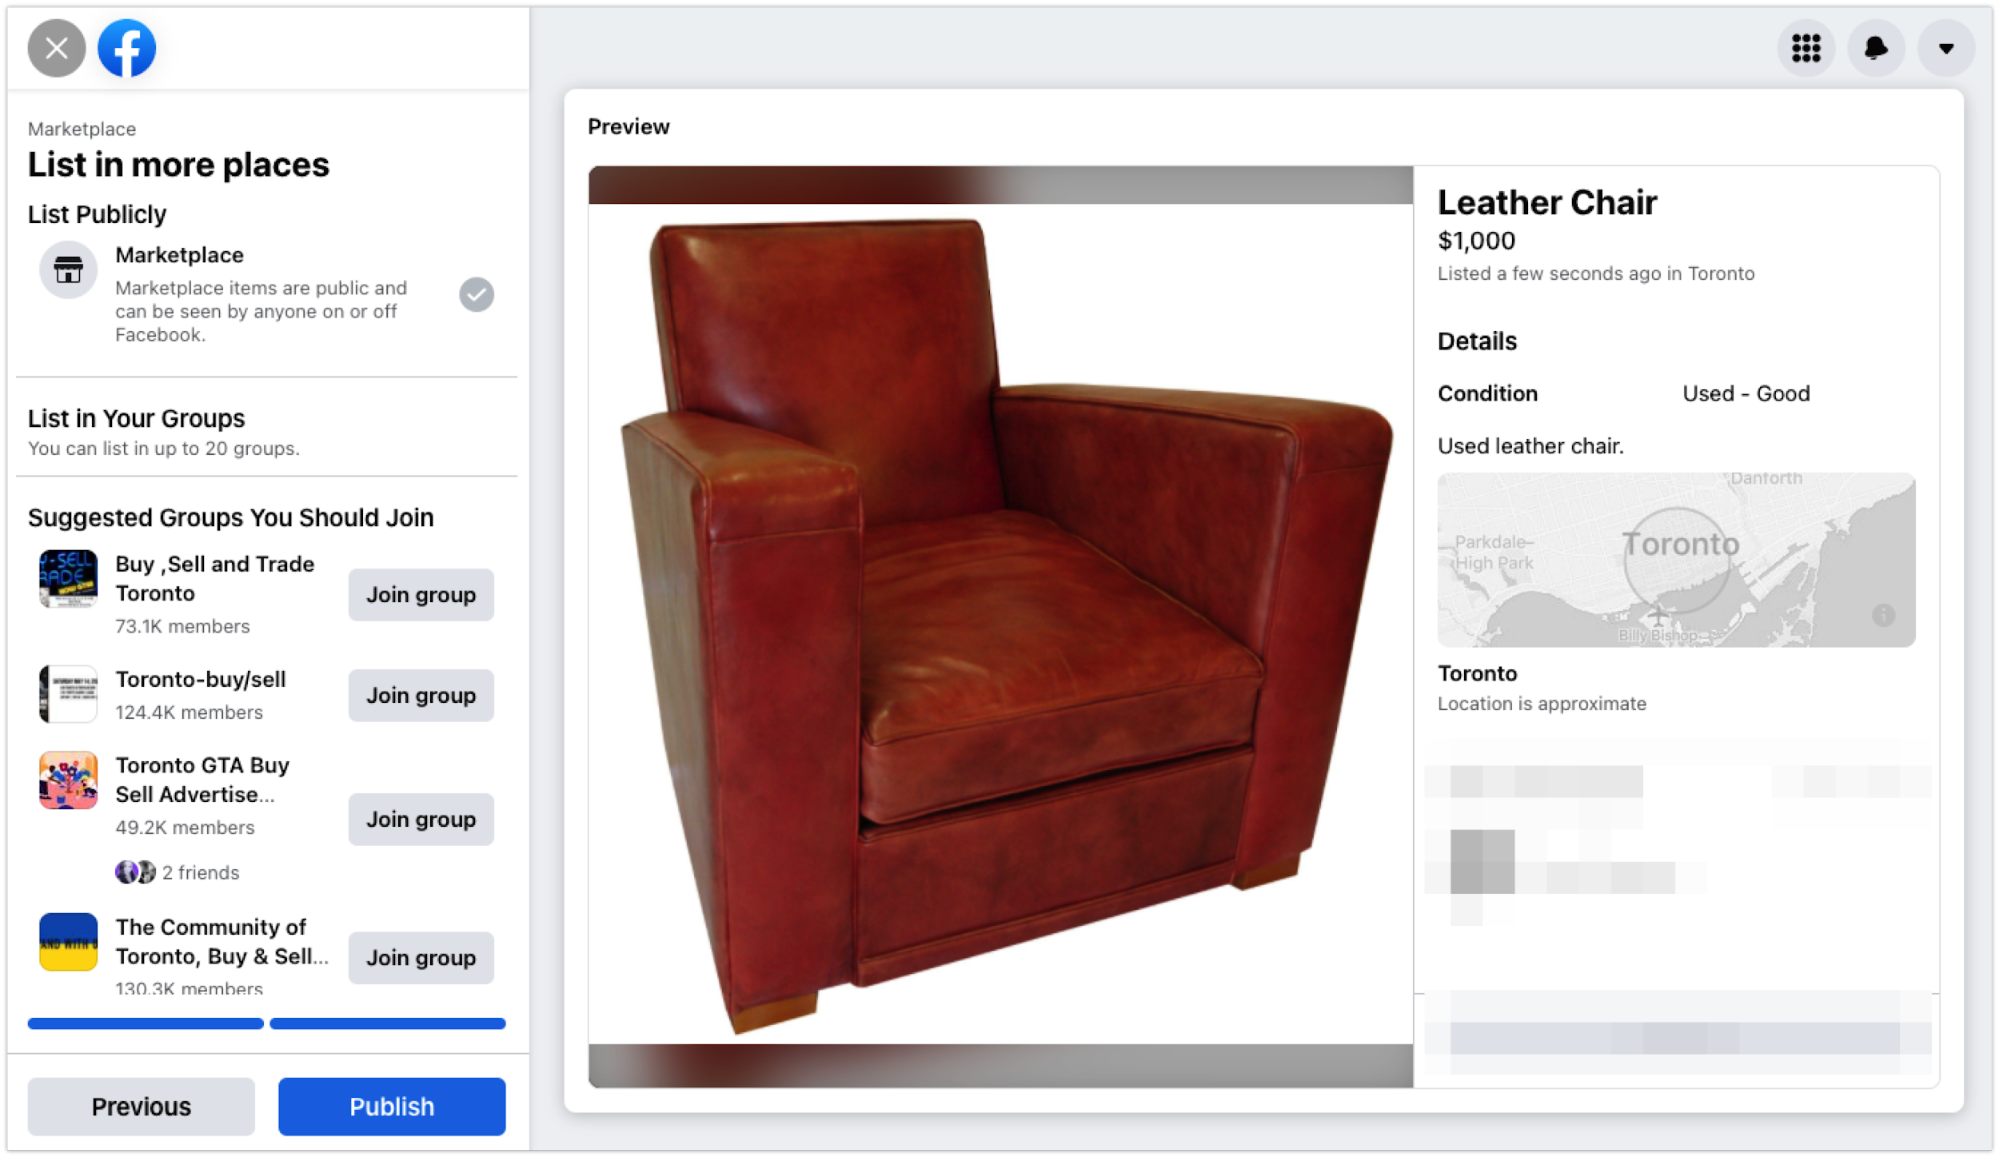 Buy and Sell group options to join beside a preview of a listing for a leather chair